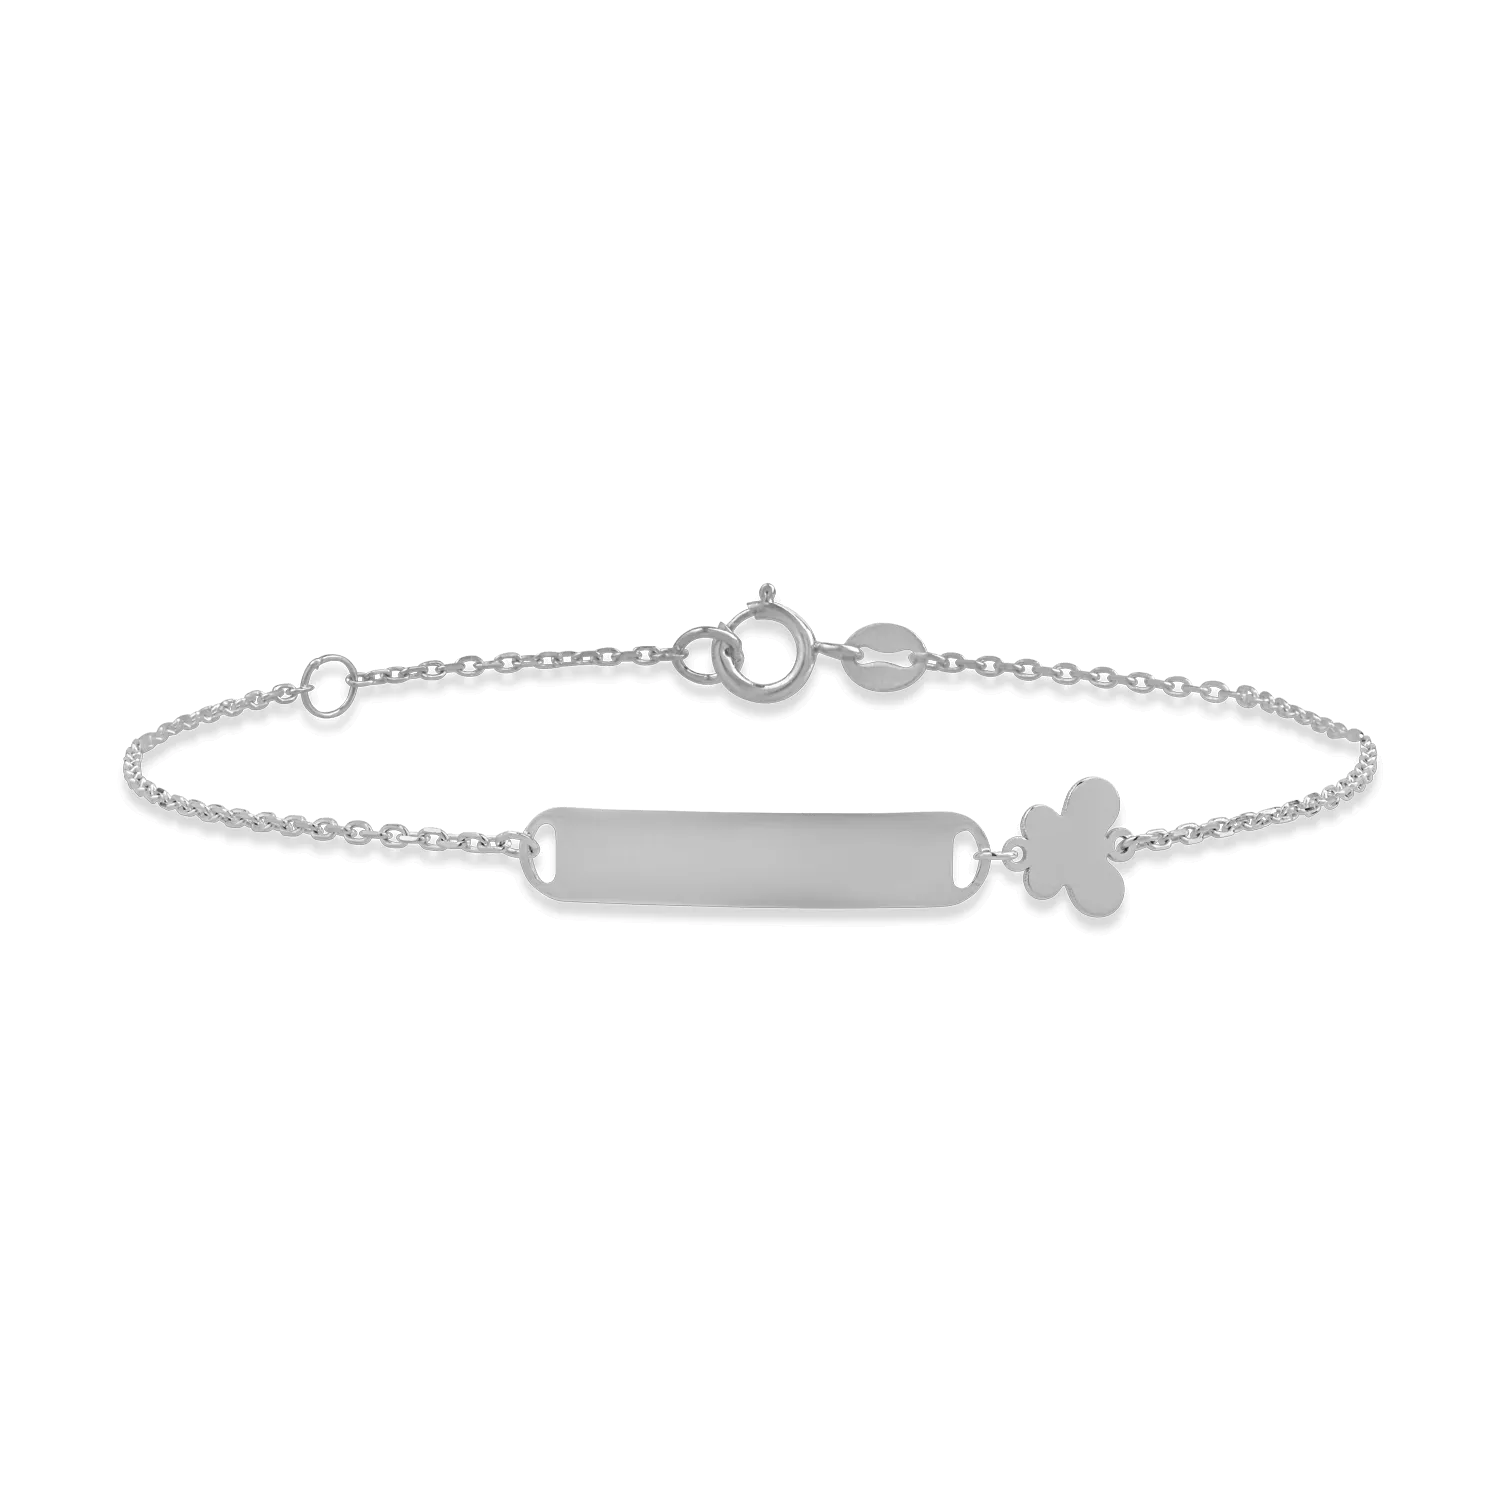 White gold bracelet with engraving plate